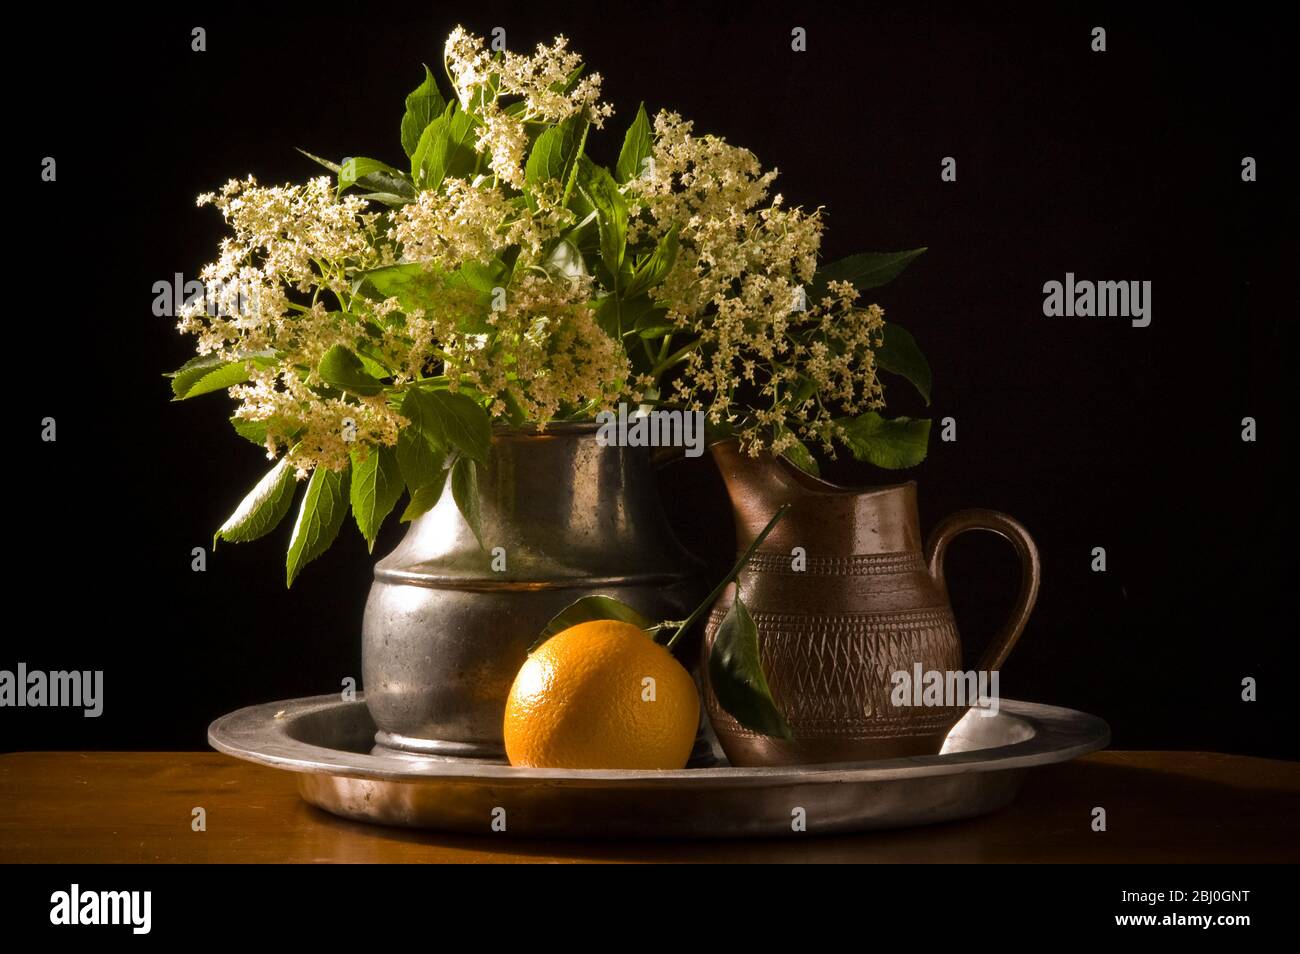 Elderflowers and orange with leaves on pewter charger with black background - Stock Photo